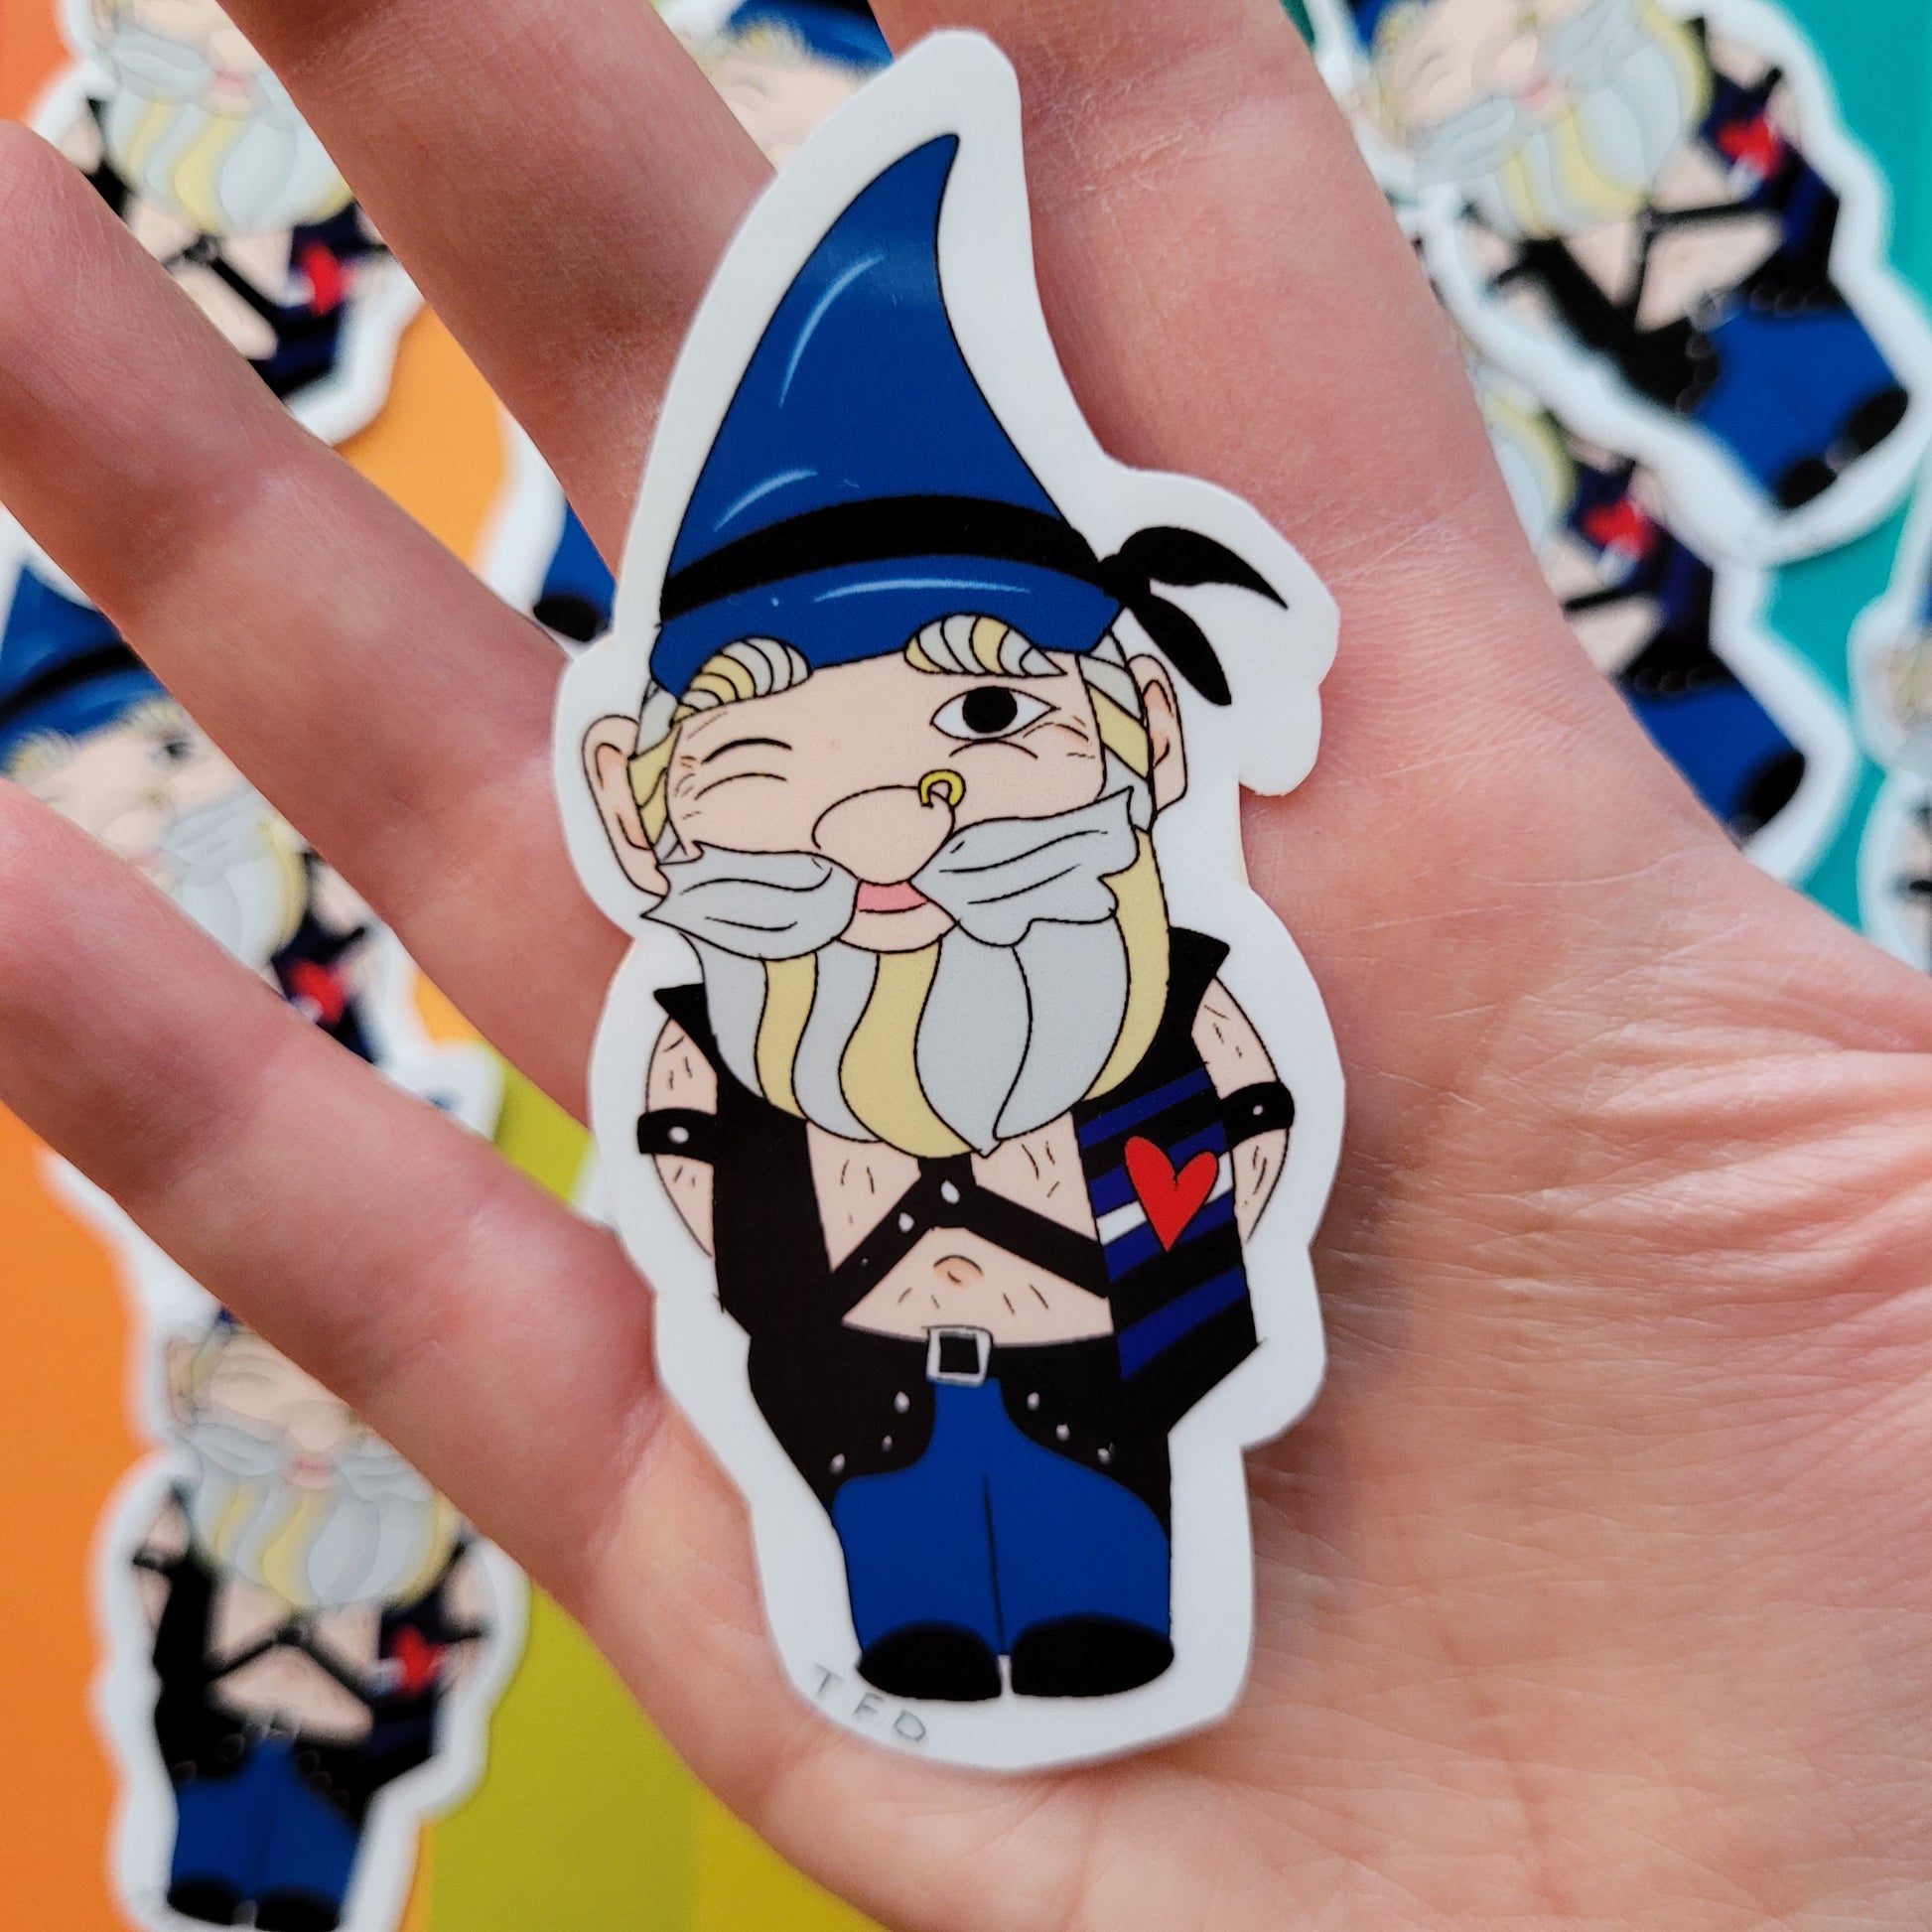 leather daddy gnome sticker held in palm of hand for size